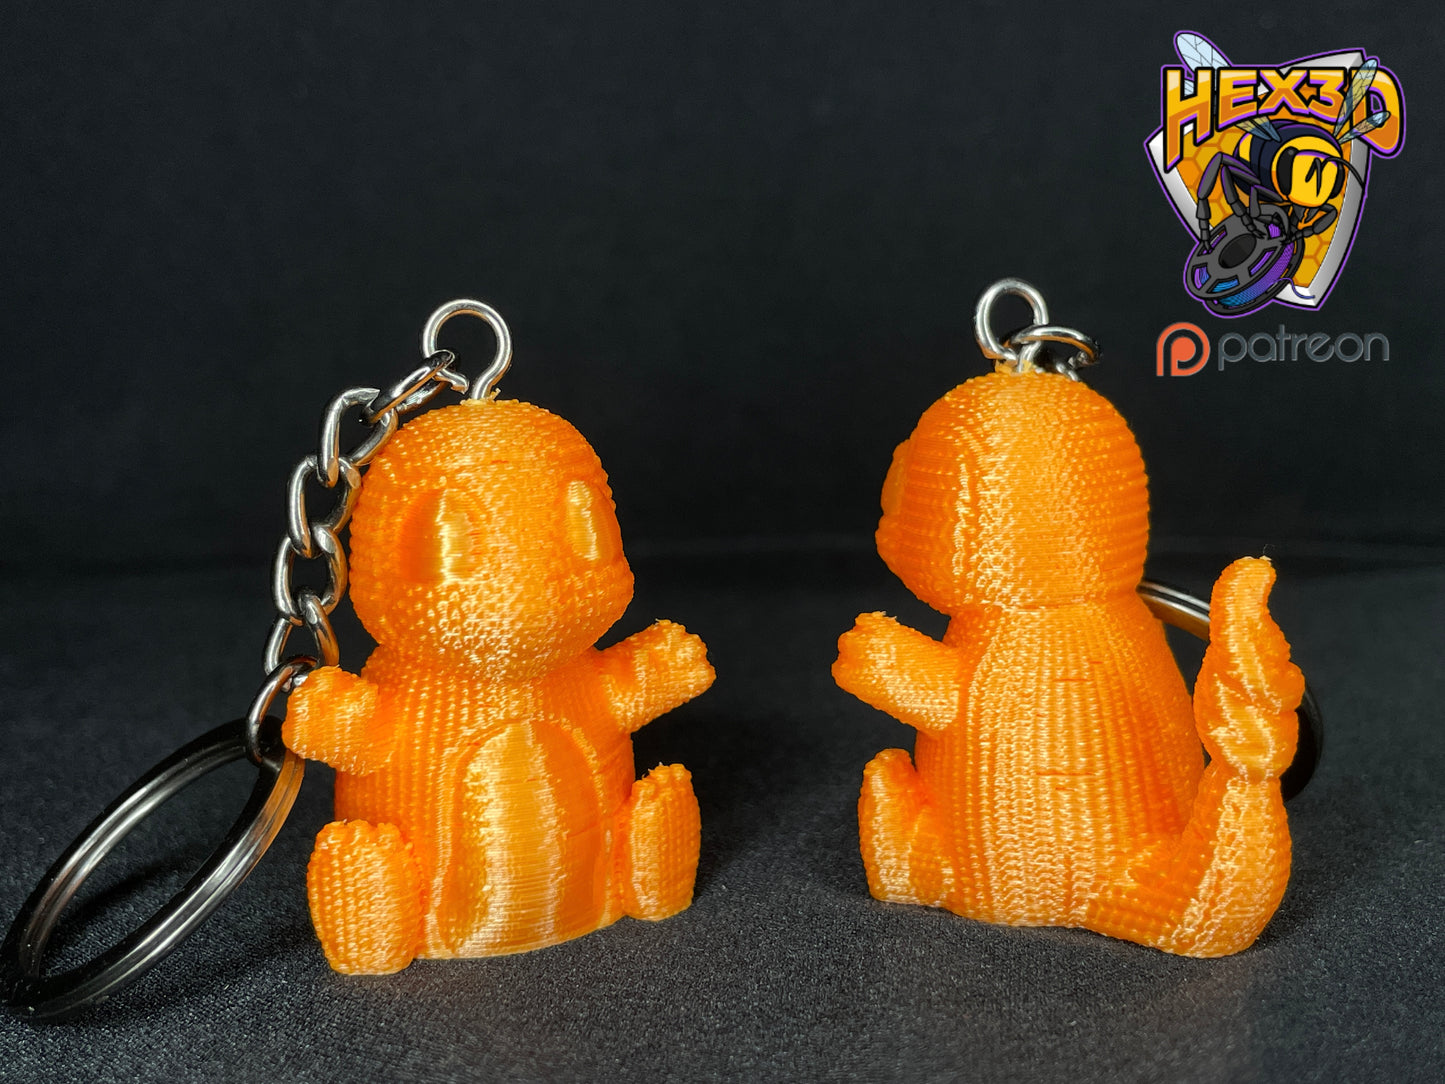 "Knitted" Charmander Keychain by Hex3D